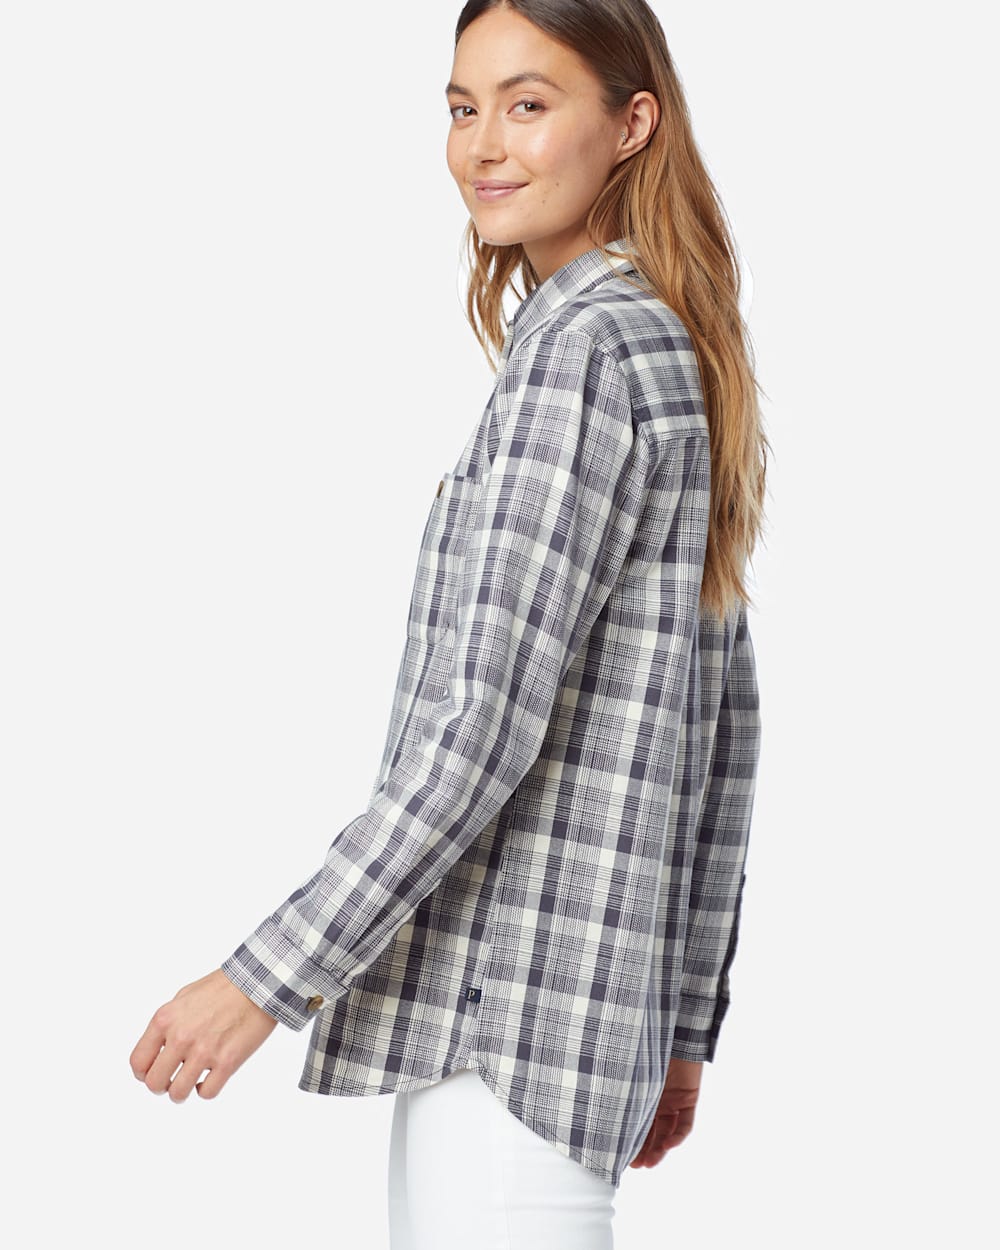 WOMEN'S BEACH SHACK SHIRT IN IVORY/NAVY PLAID image number 3